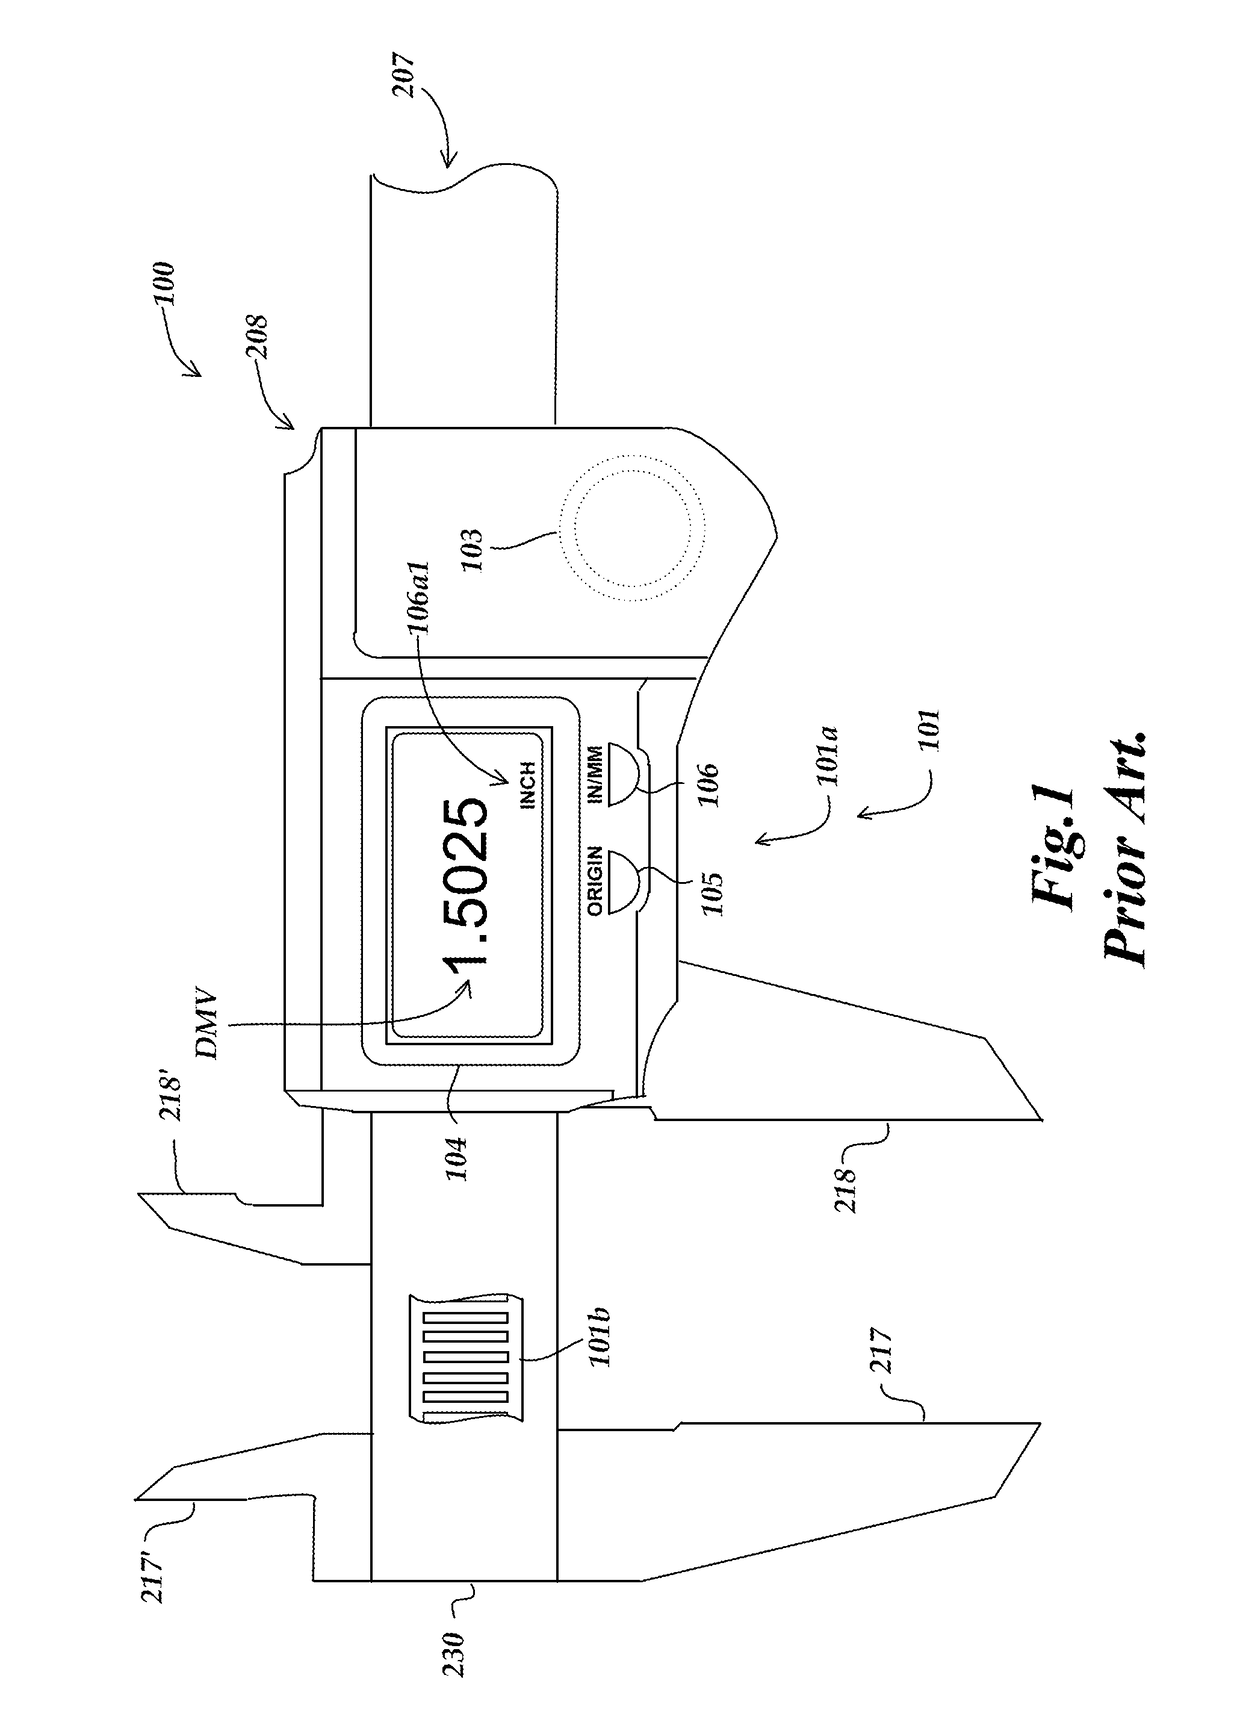 Handheld measuring device comprising a user interface responsive to changes in a displacement sensed by a displacement sensor